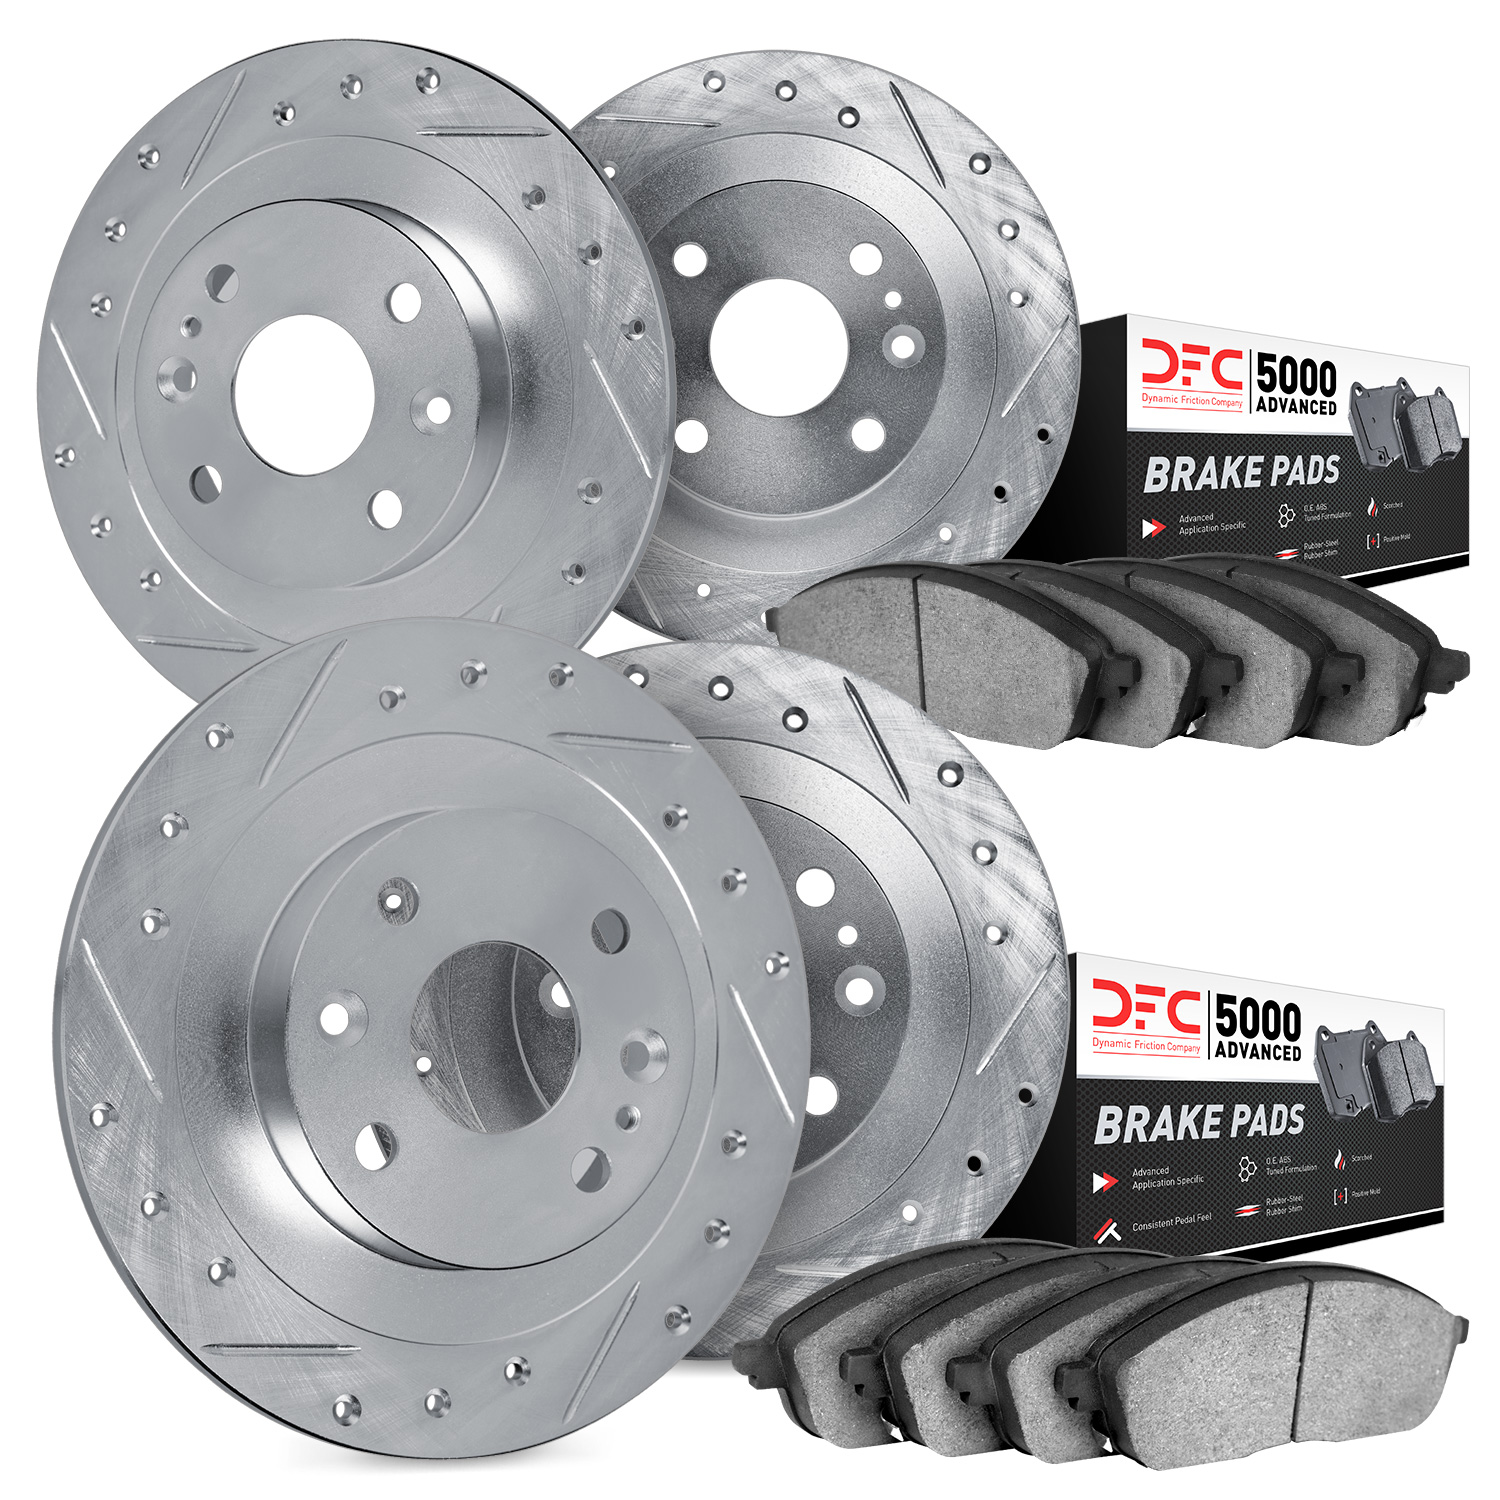 7504-28000 Drilled/Slotted Brake Rotors w/5000 Advanced Brake Pads Kit [Silver], 1971-1981 Peugeot, Position: Front and Rear